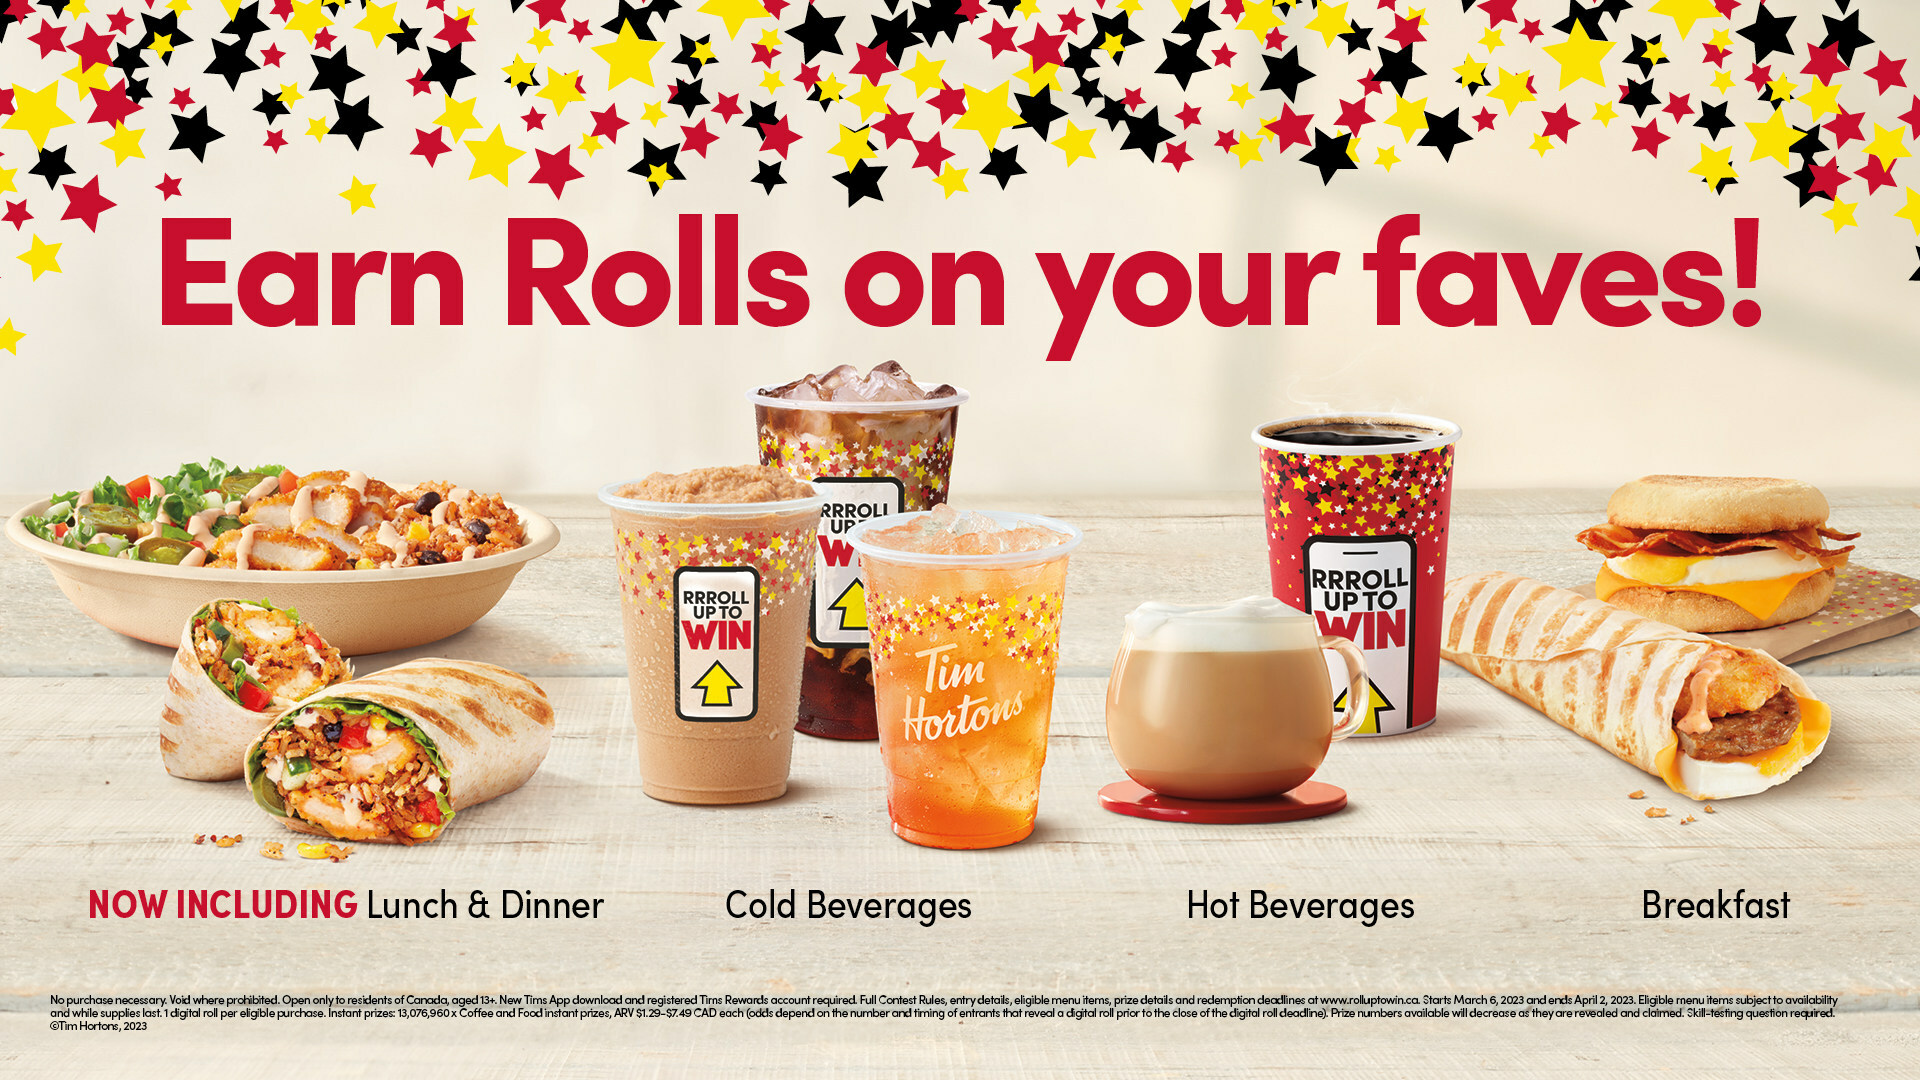 Tim Hortons Iconic Roll Up To Win Contest is BACK and Starts March 6 AdStasher photo image